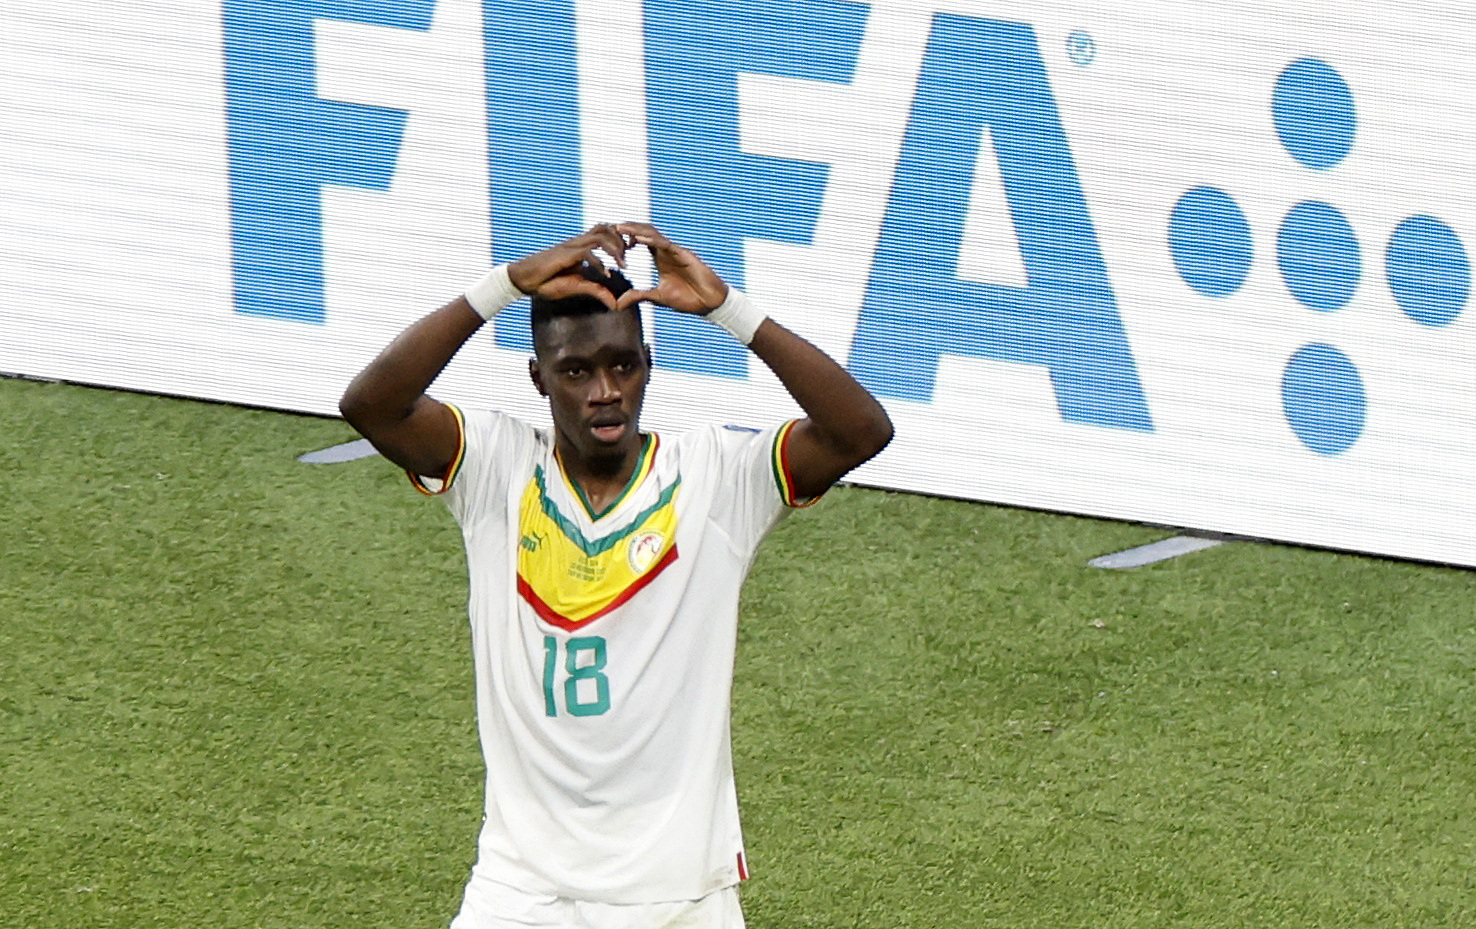 Ismaila Sarr Senegal's 'X-Factor' for World Cup last 16 clash vs England as winger swaps Championship for biggest stage | The US Sun